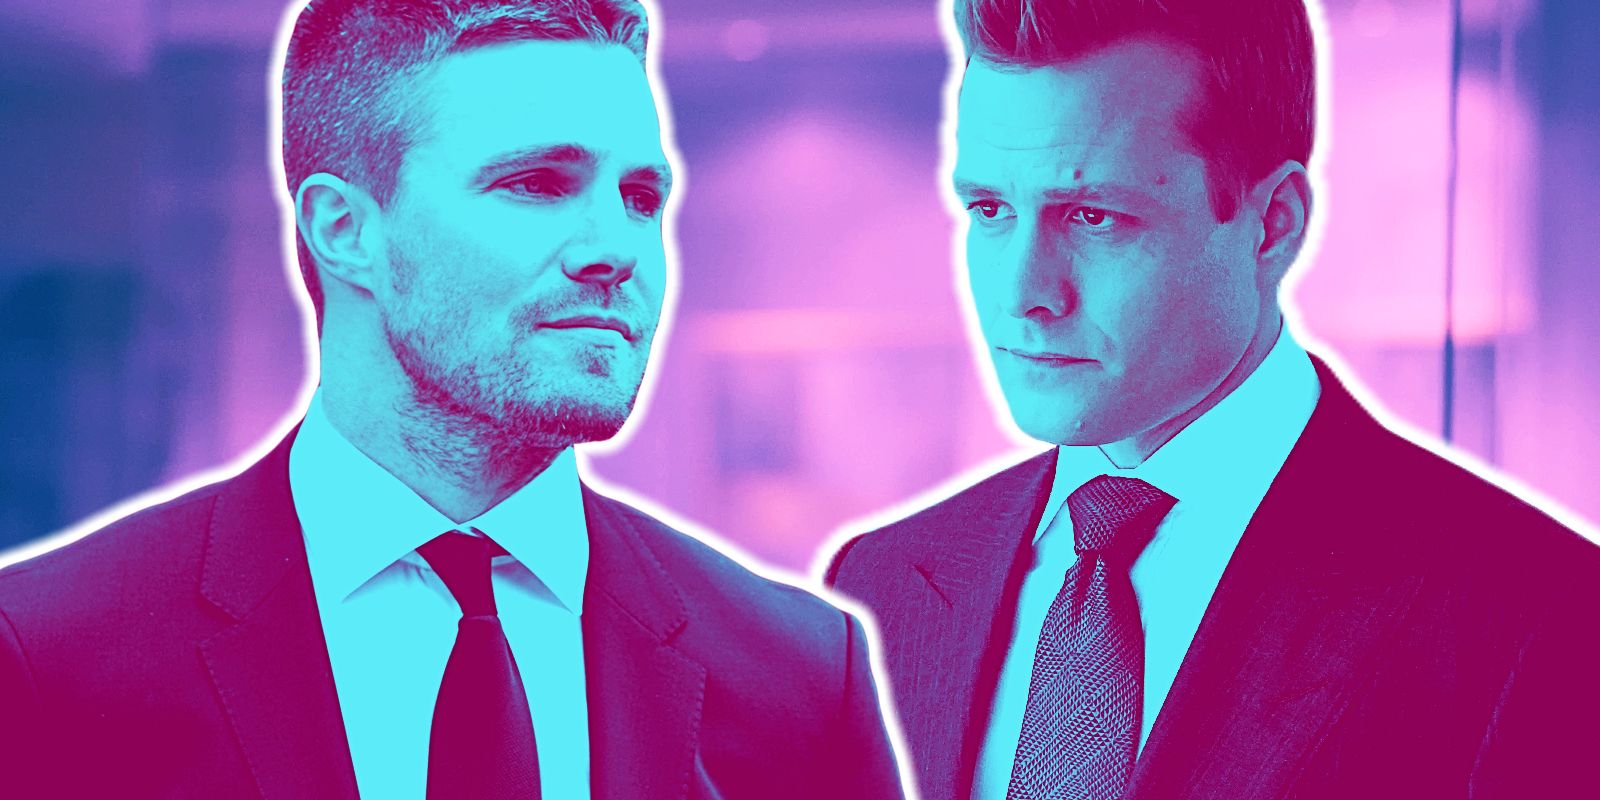 Custom image of Stephen Amell as Oliver Queen from Arrow and Gabriel Macht as Harvey Spectre from Suits.